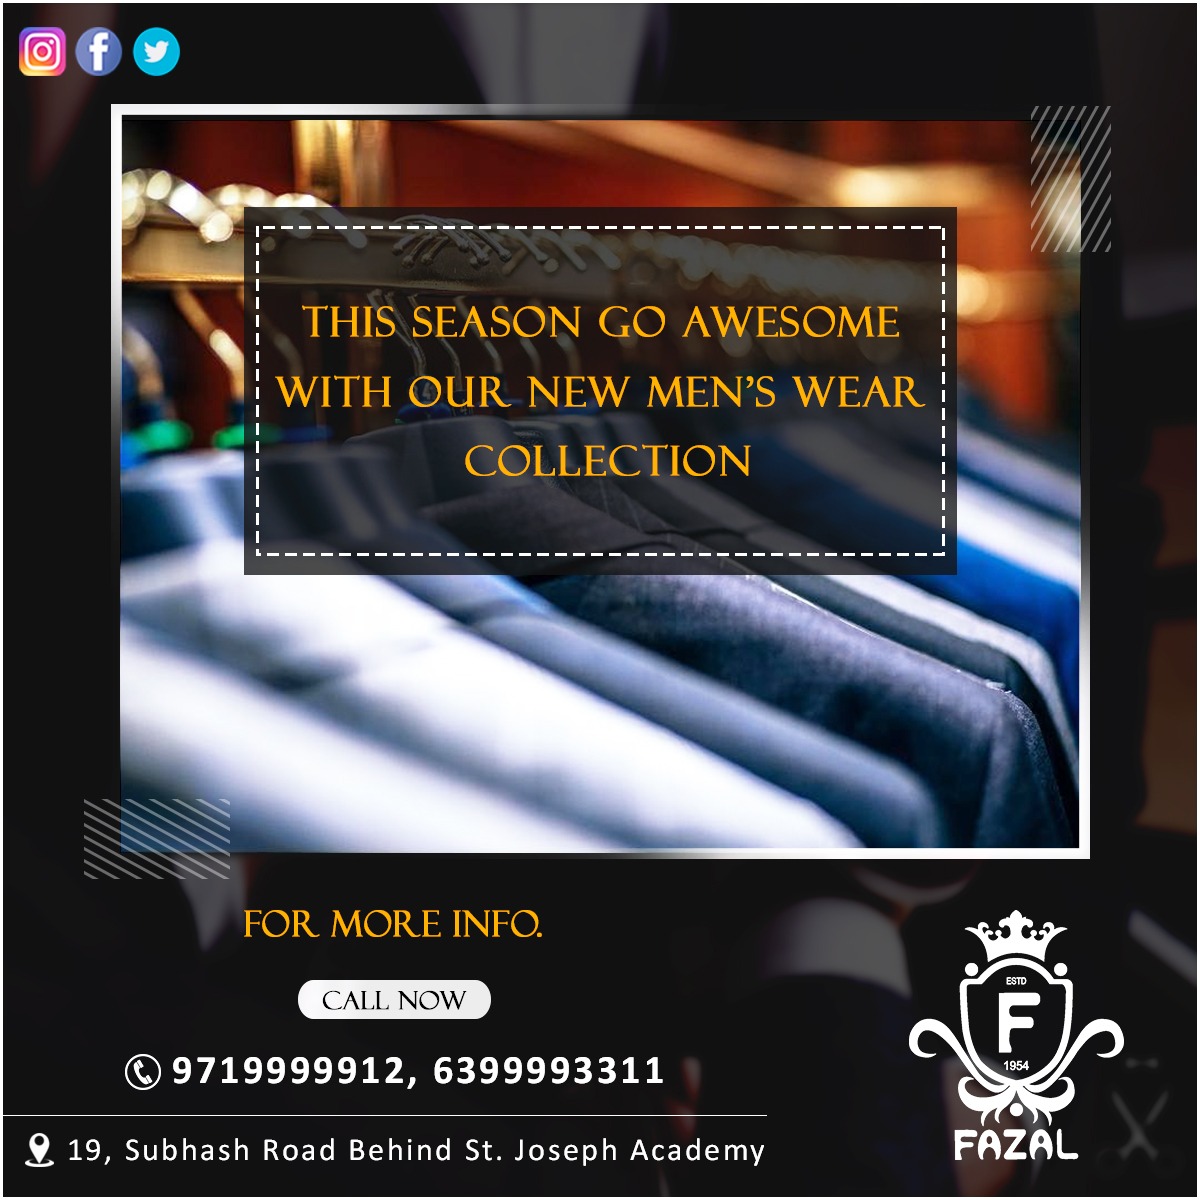 A suit is the uniform of success. And elegance. Browse from our latest men's summer wear collection. Clothes that are sure to cool down your summers. Material that is soft for the body and gives you a sense of comfort while also keeping you fashionable. 
#fazalthedesigner